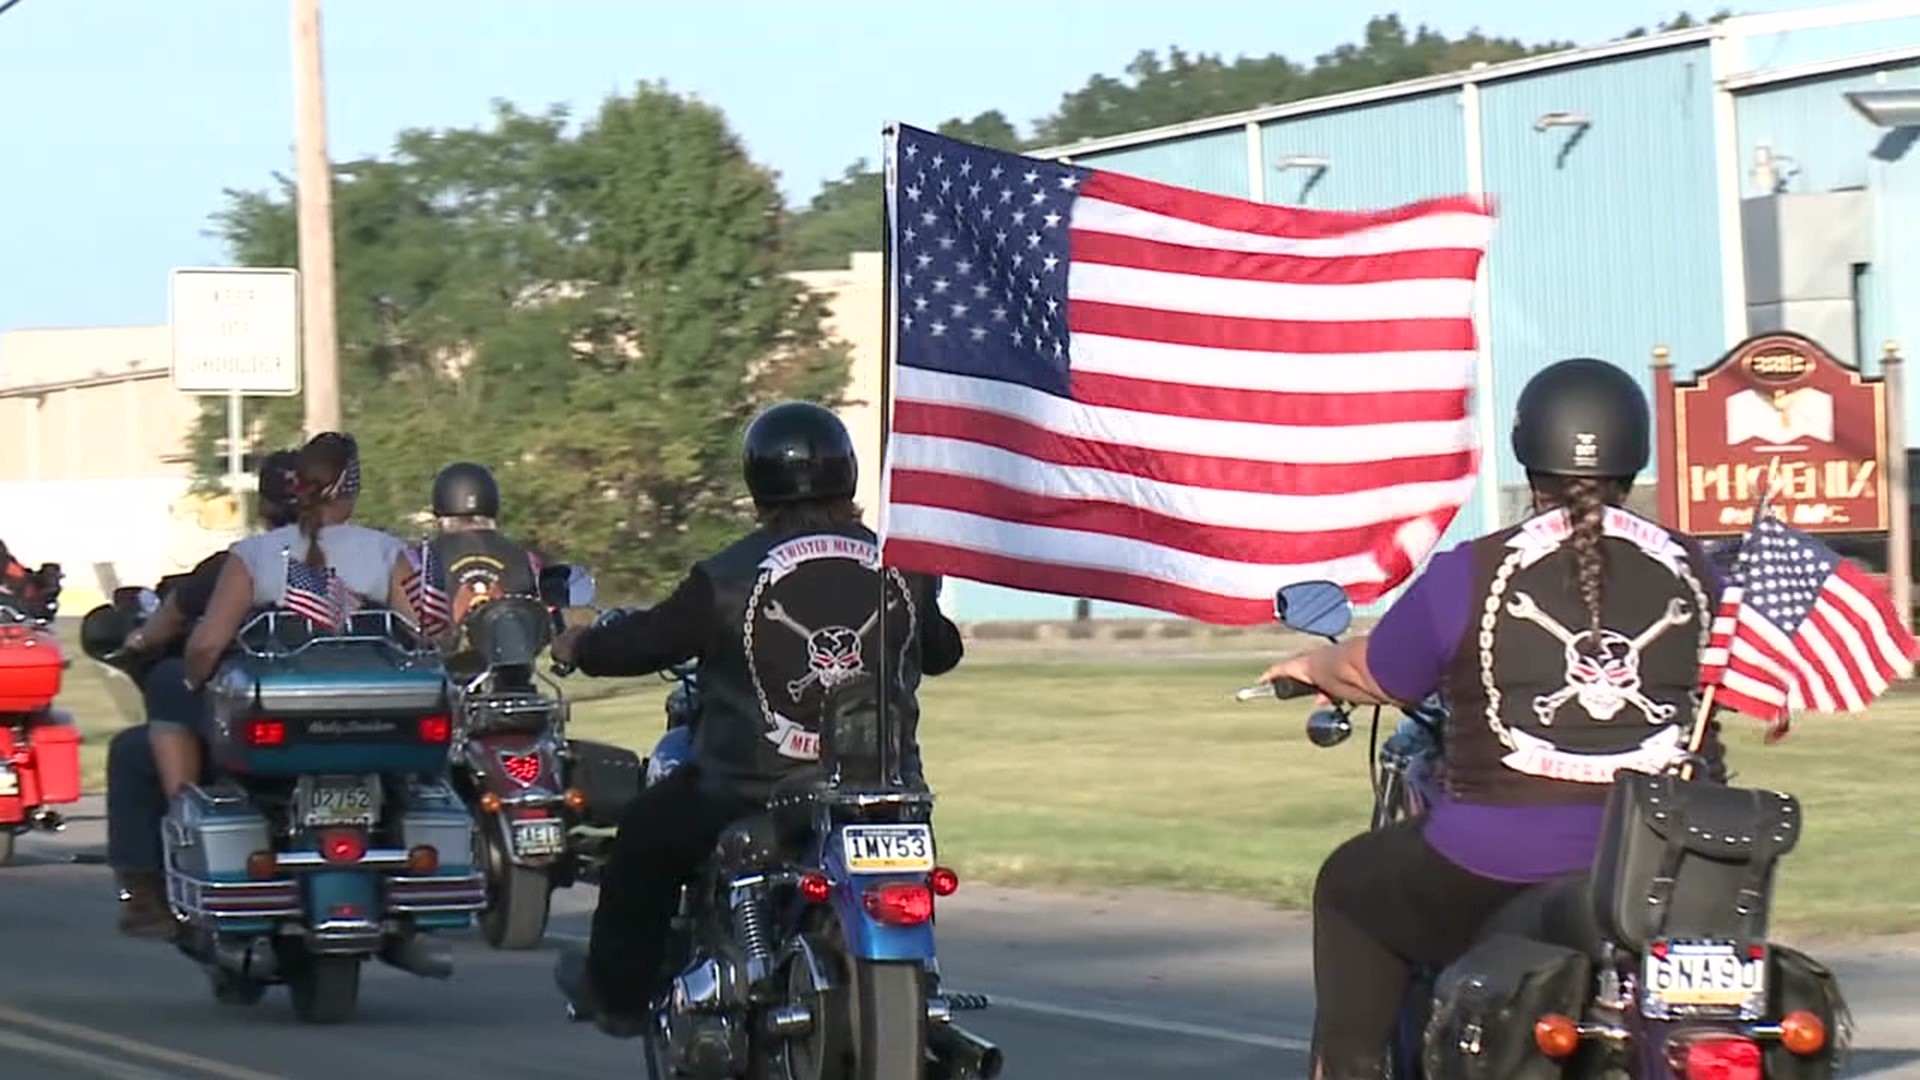 The 21st 9/11 Memorial Ride will take place in Lycoming County later this month.